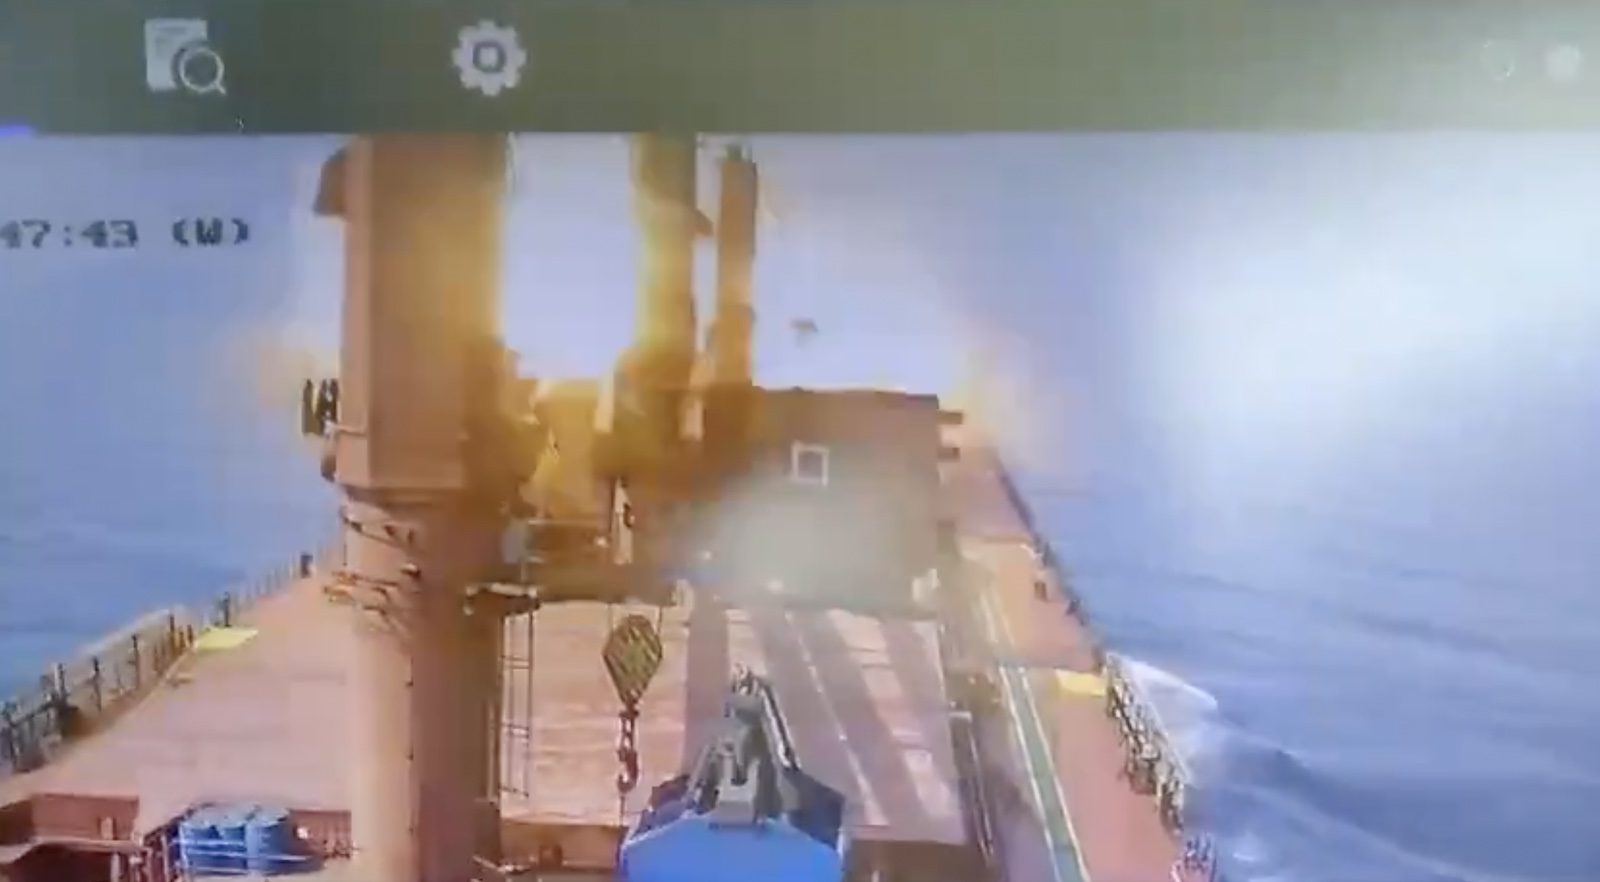 A screenshot from video allegedly shows the moment an anti-ship ballistic missile hits the deck of the M/V Zografia in the Southern Red Sea.